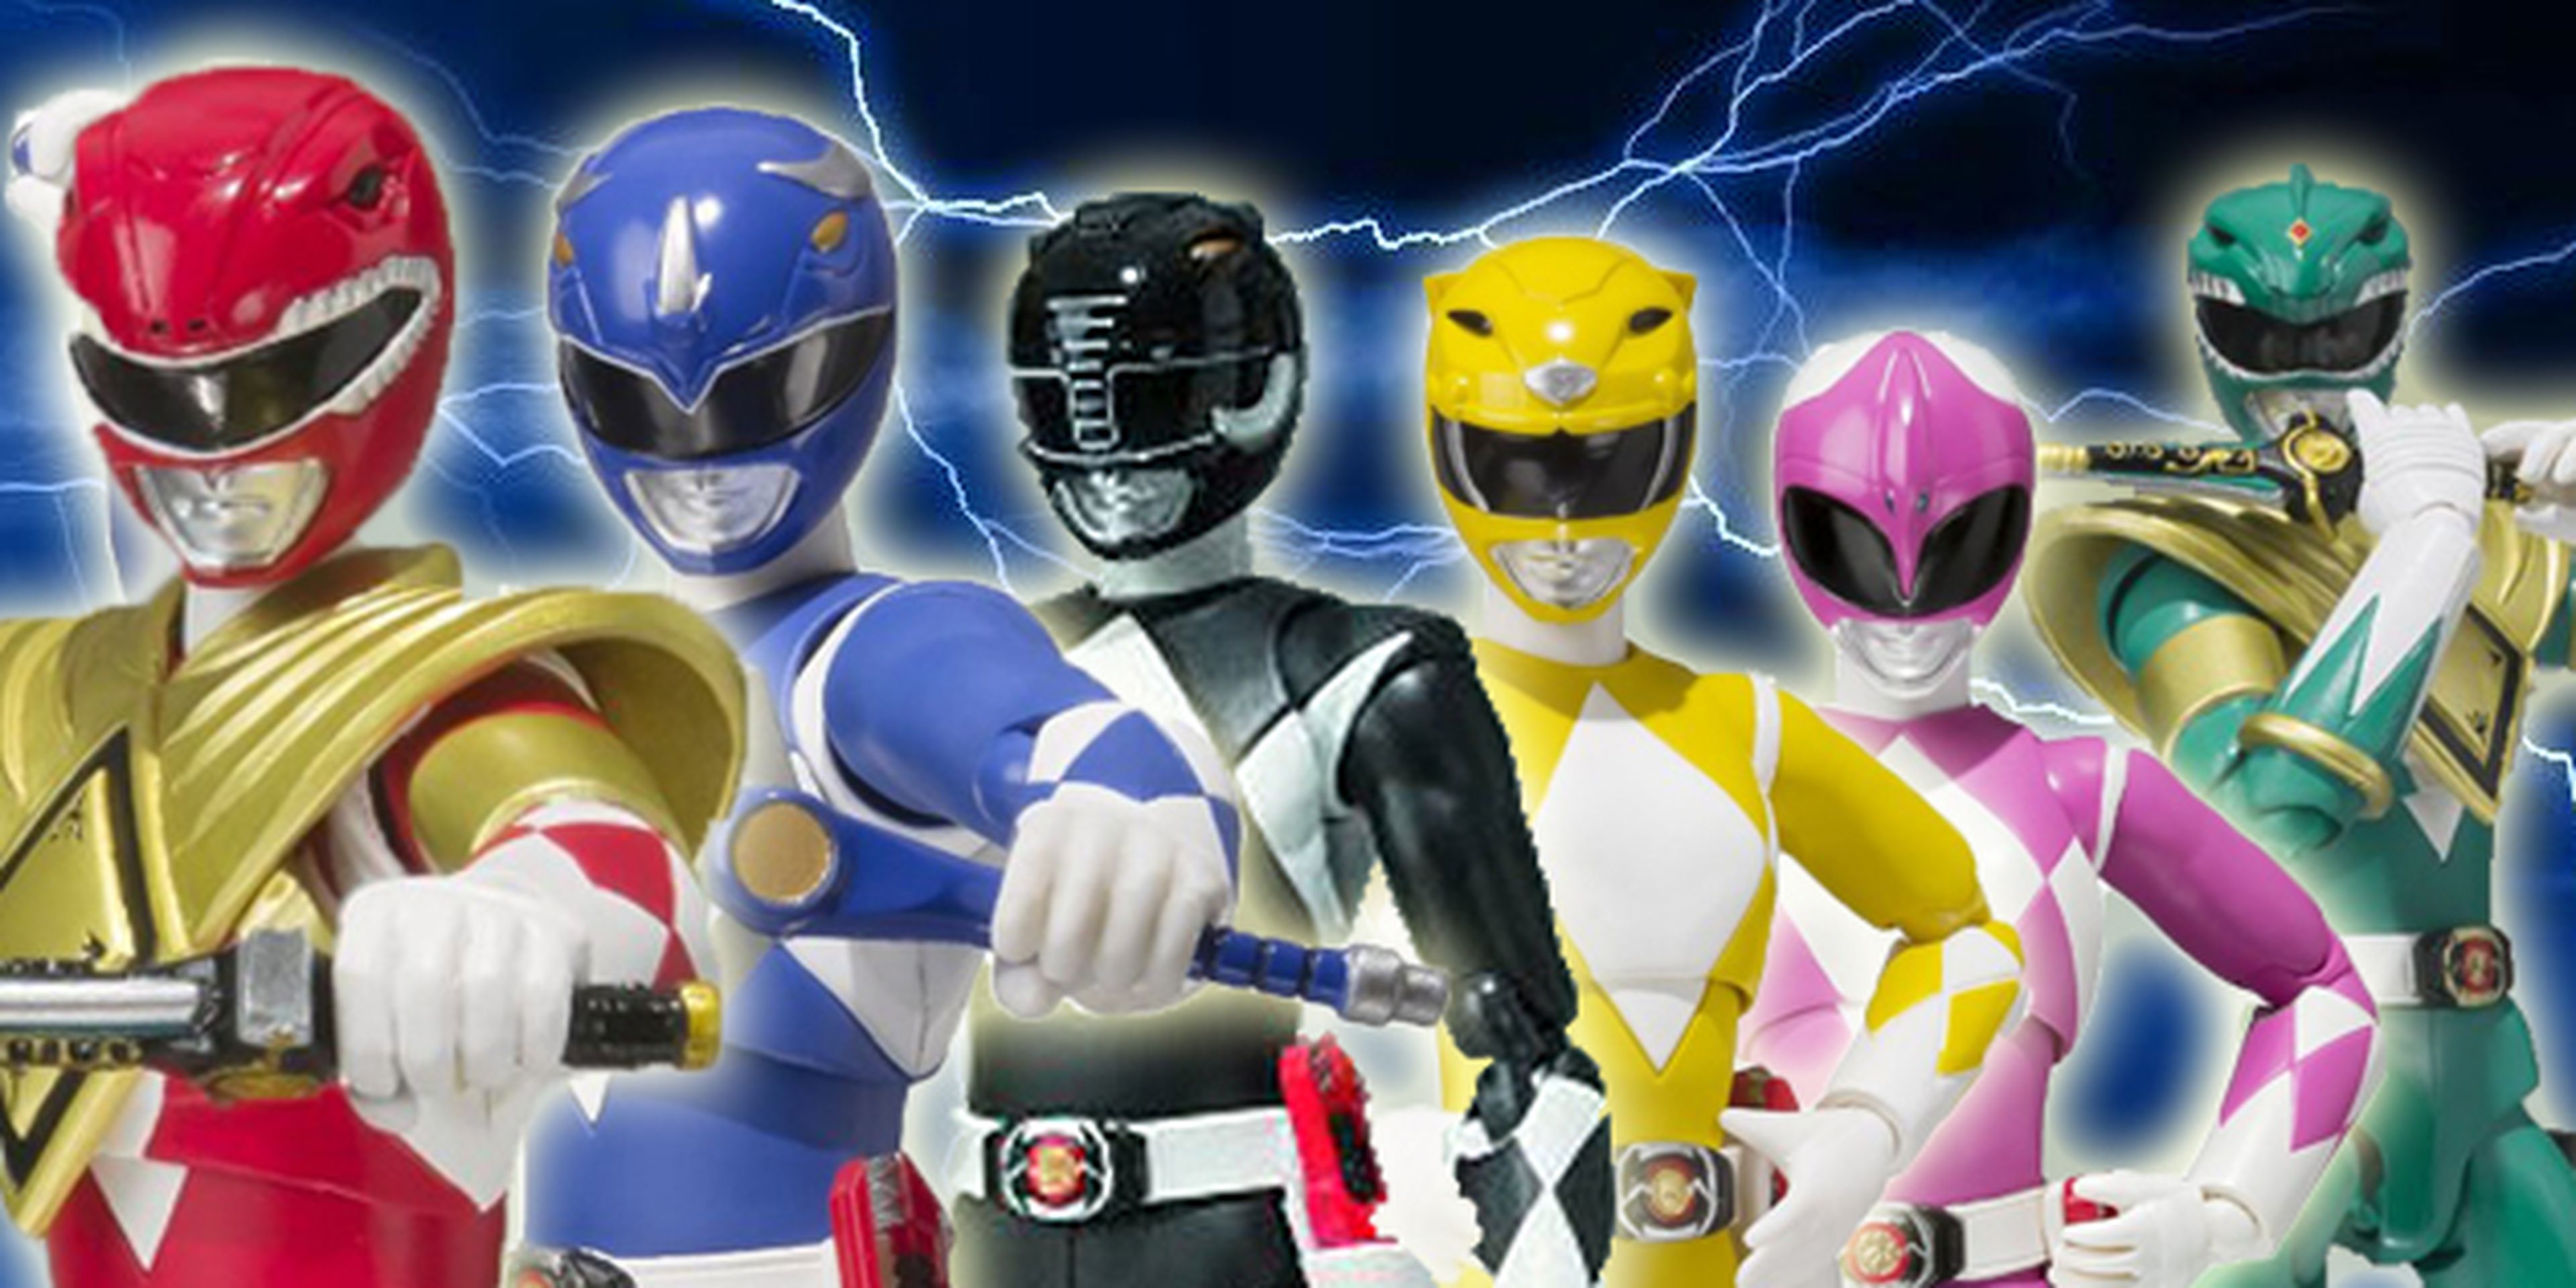 Power_Rangers_-_Mighty_Morphin_-_Retro_Figures_-_TV_Toy_Commercial_-_TV_Spot_-_Bandai